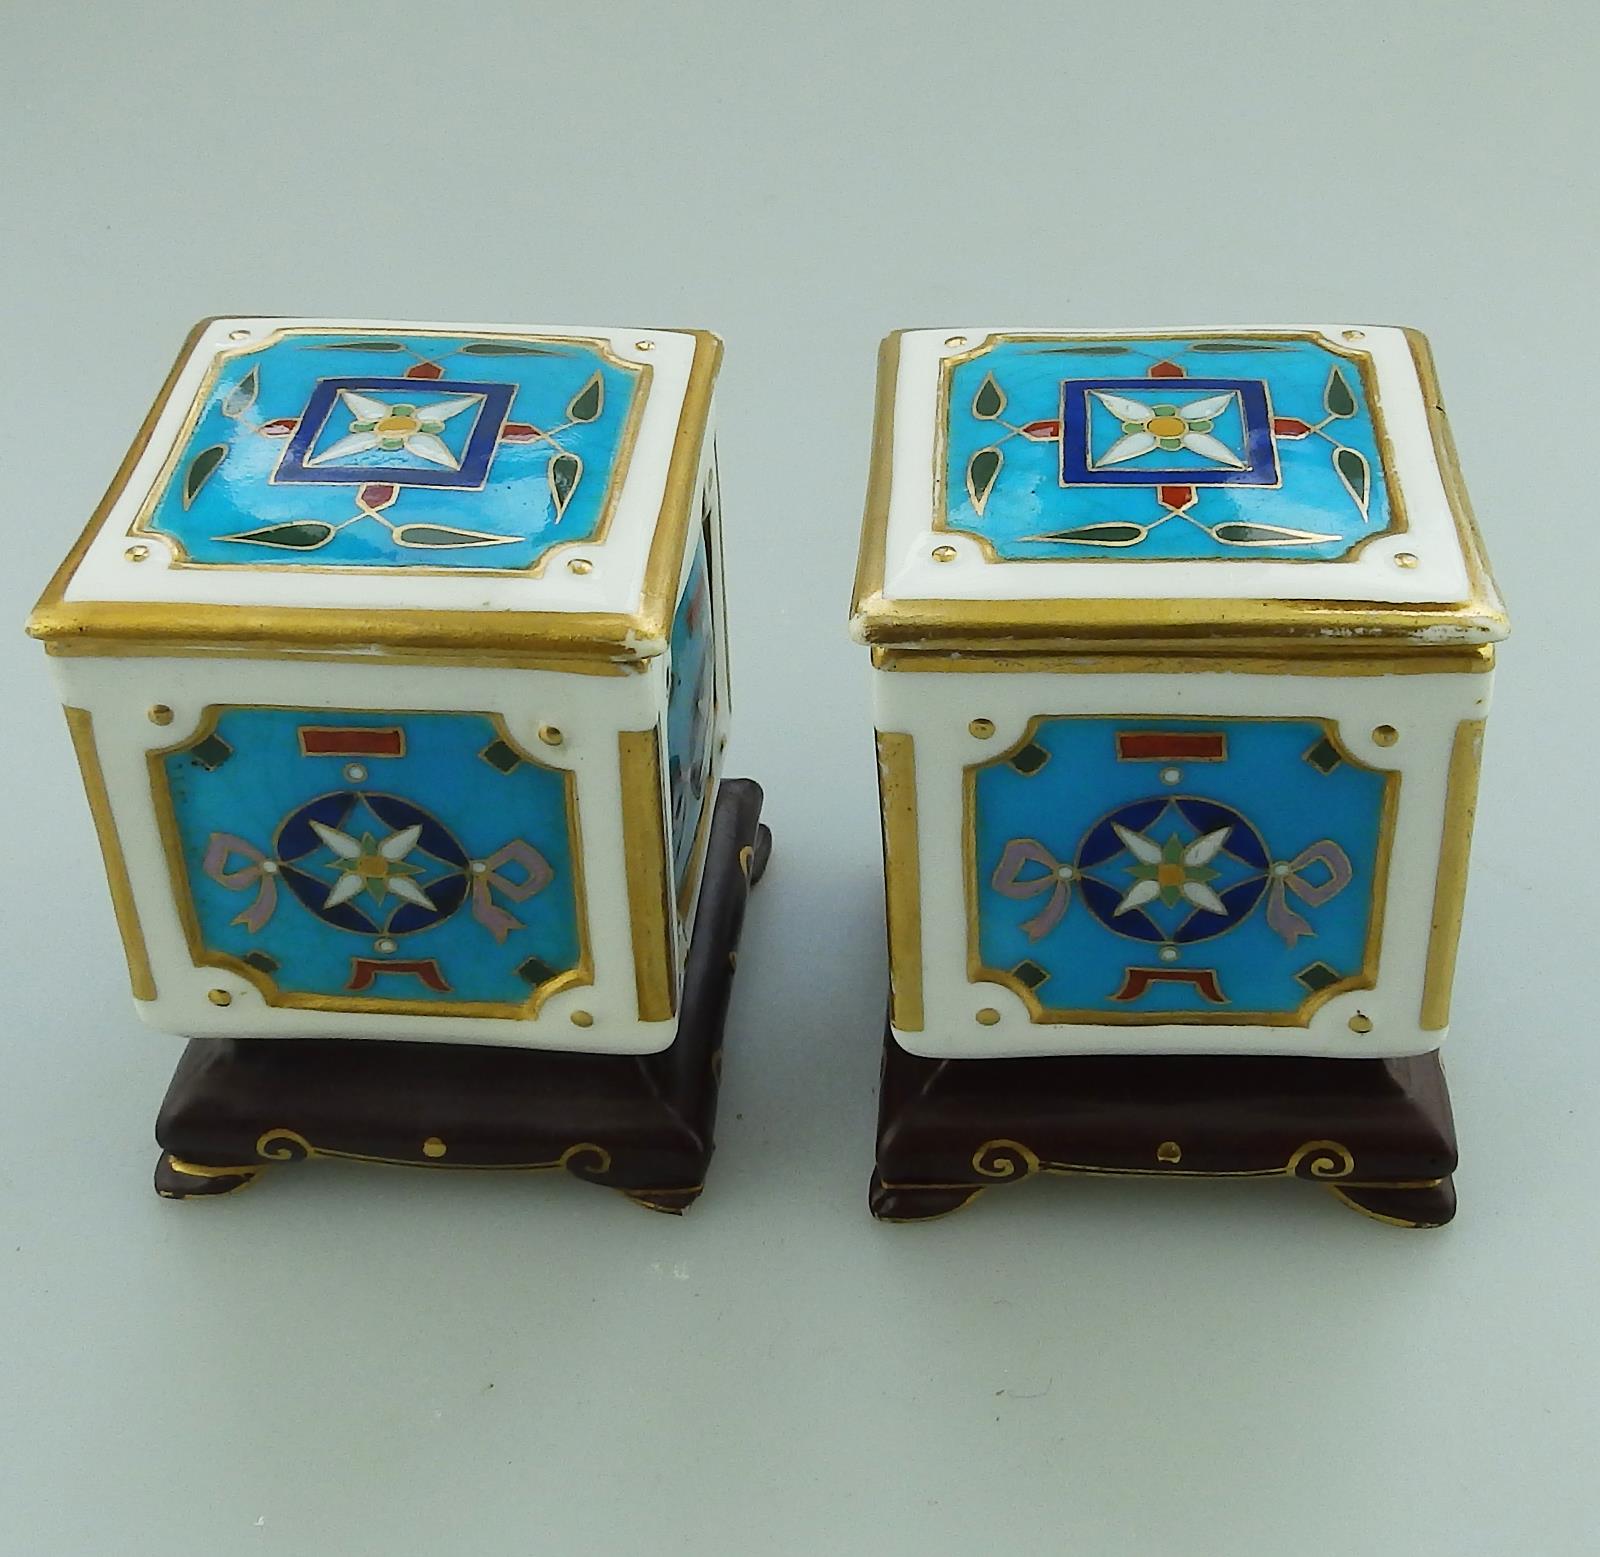 A pair of Minton porcelain miniature Boxes designed by Christopher Dresser 19thC - Image 3 of 9